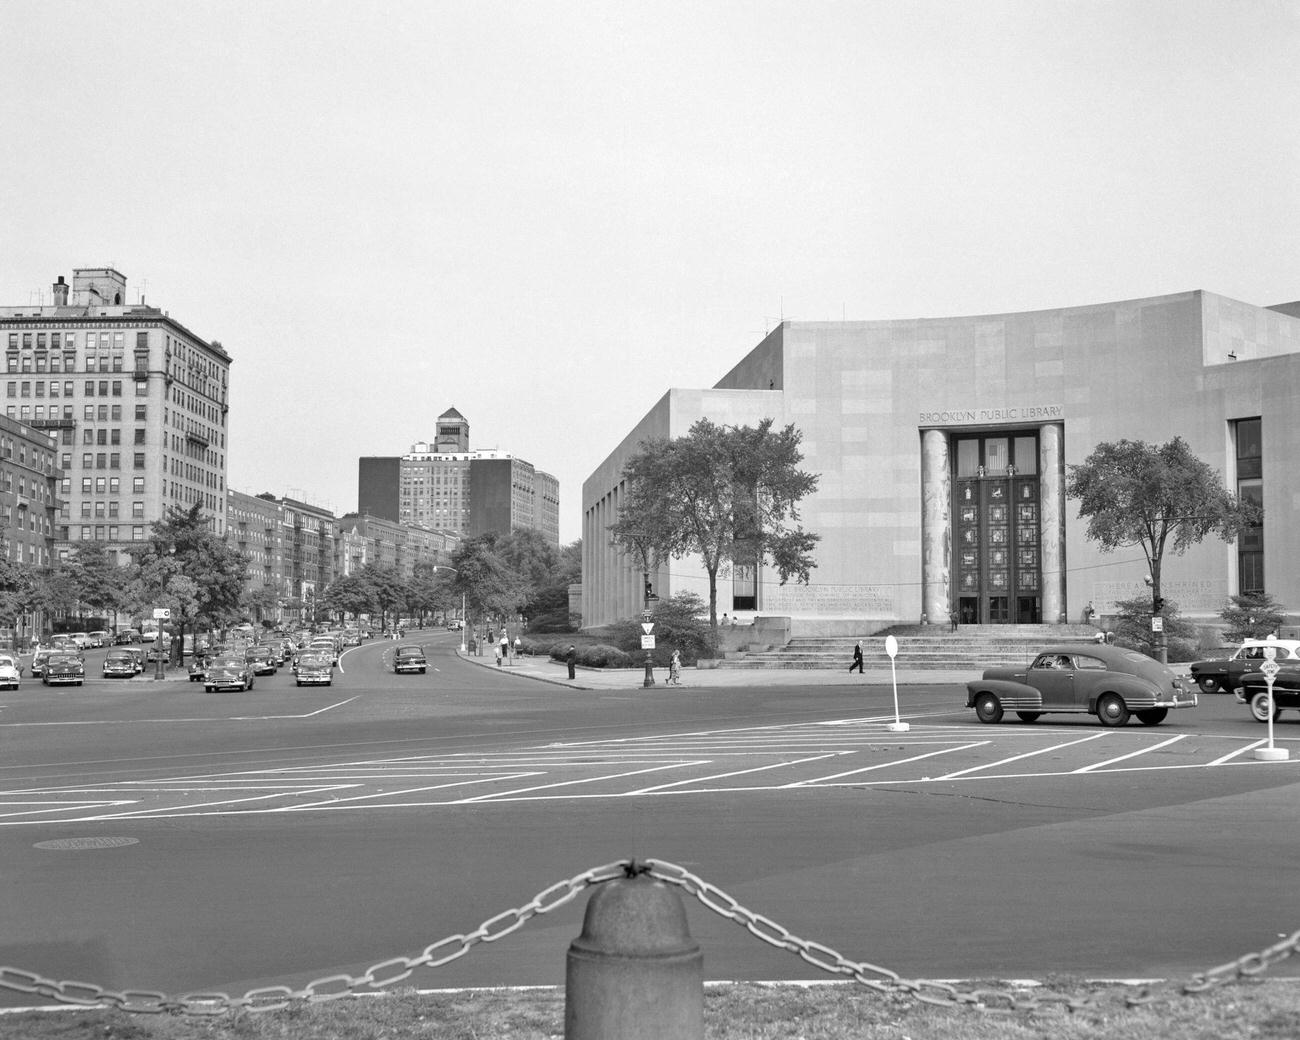 Brooklyn Public Library As Seen From The Grand Army Plaza, Brooklyn, 1950S.